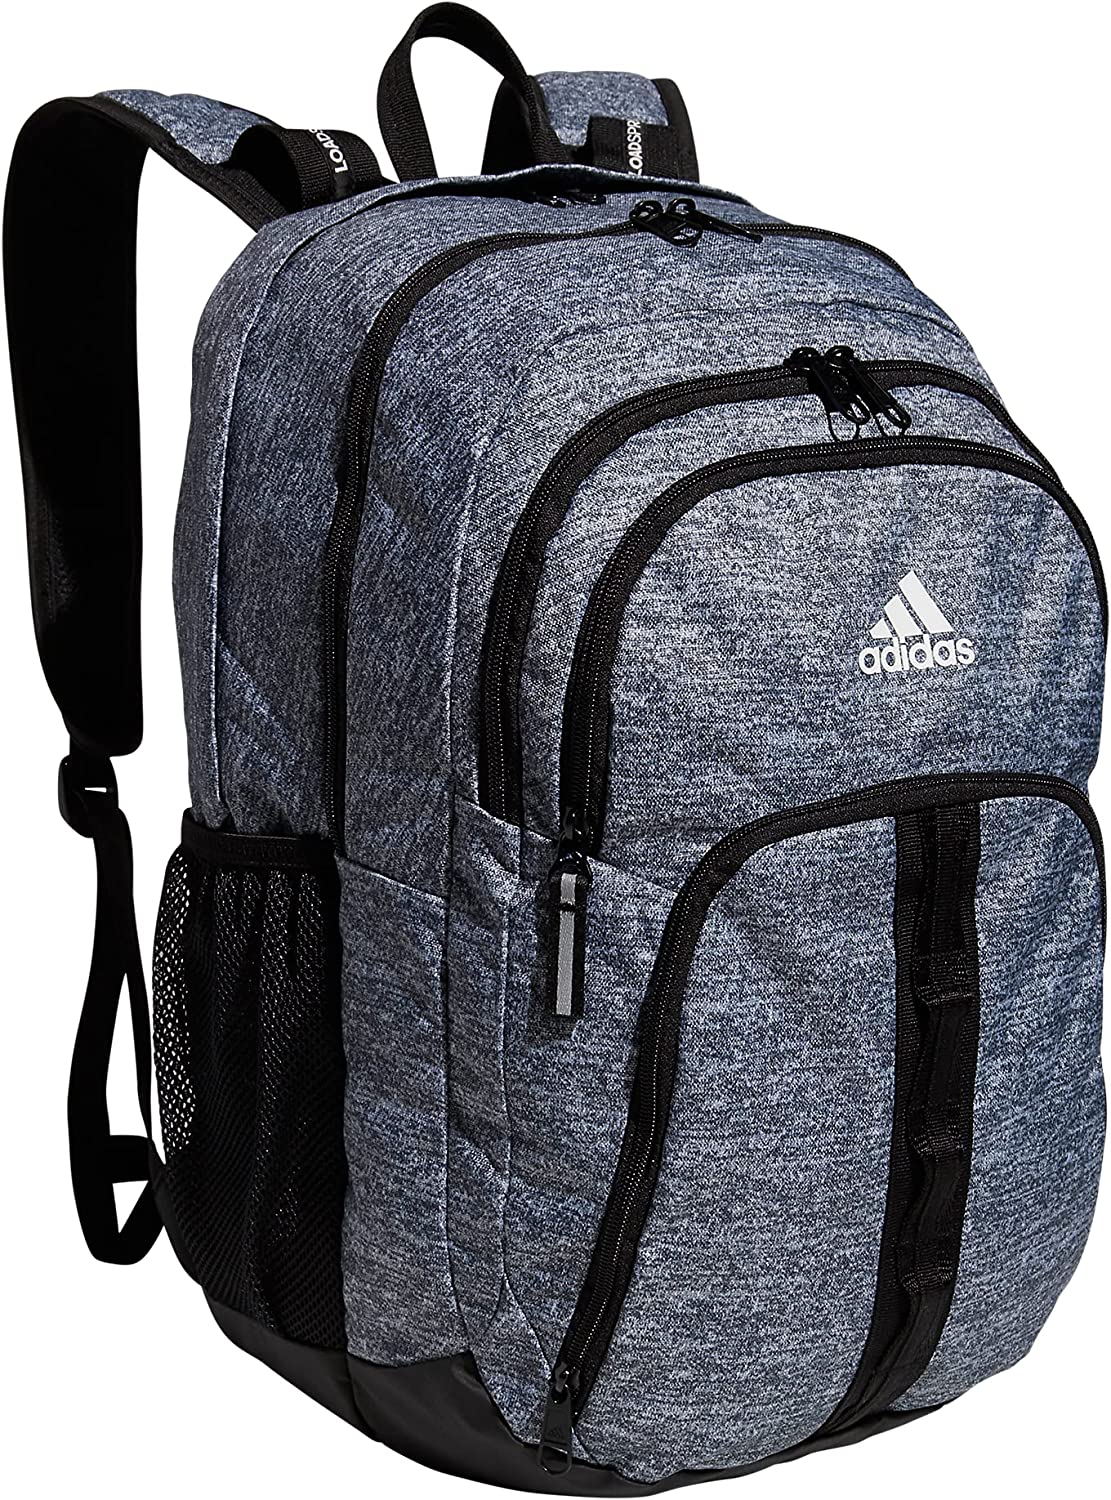 Adidas Prime 6 Backpack Review